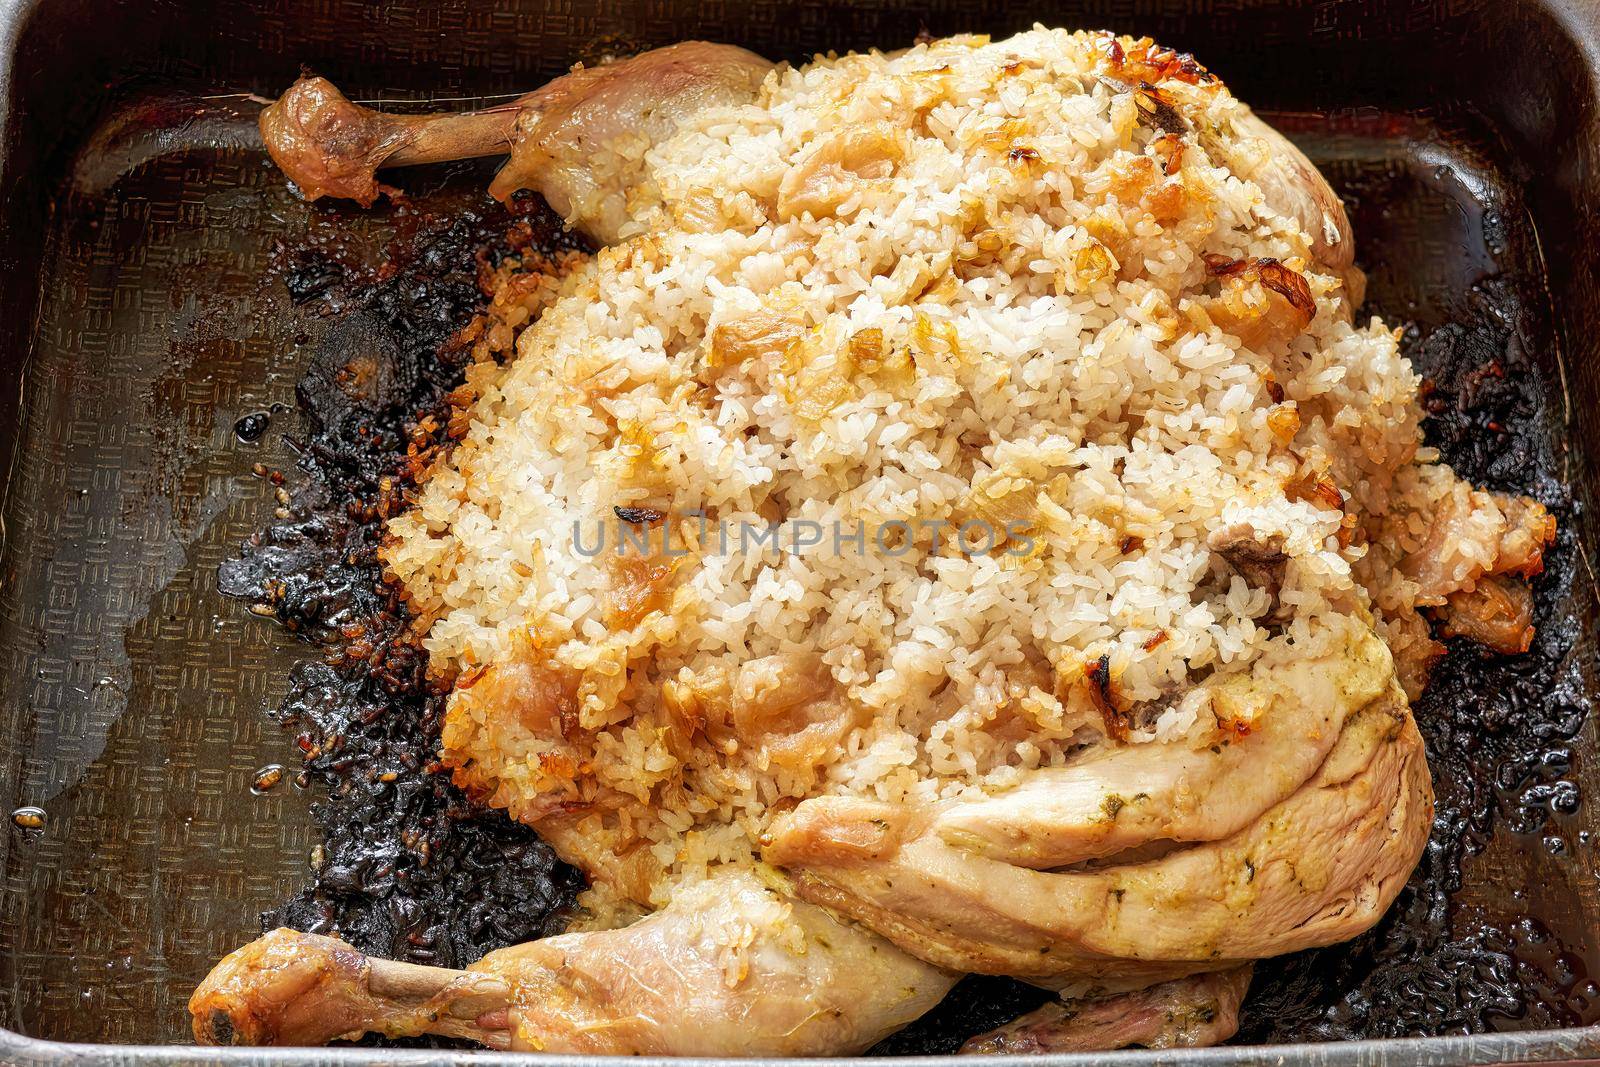 Burnt chicken stuffed with rice on a metal pan. Unsuccessful food preparation